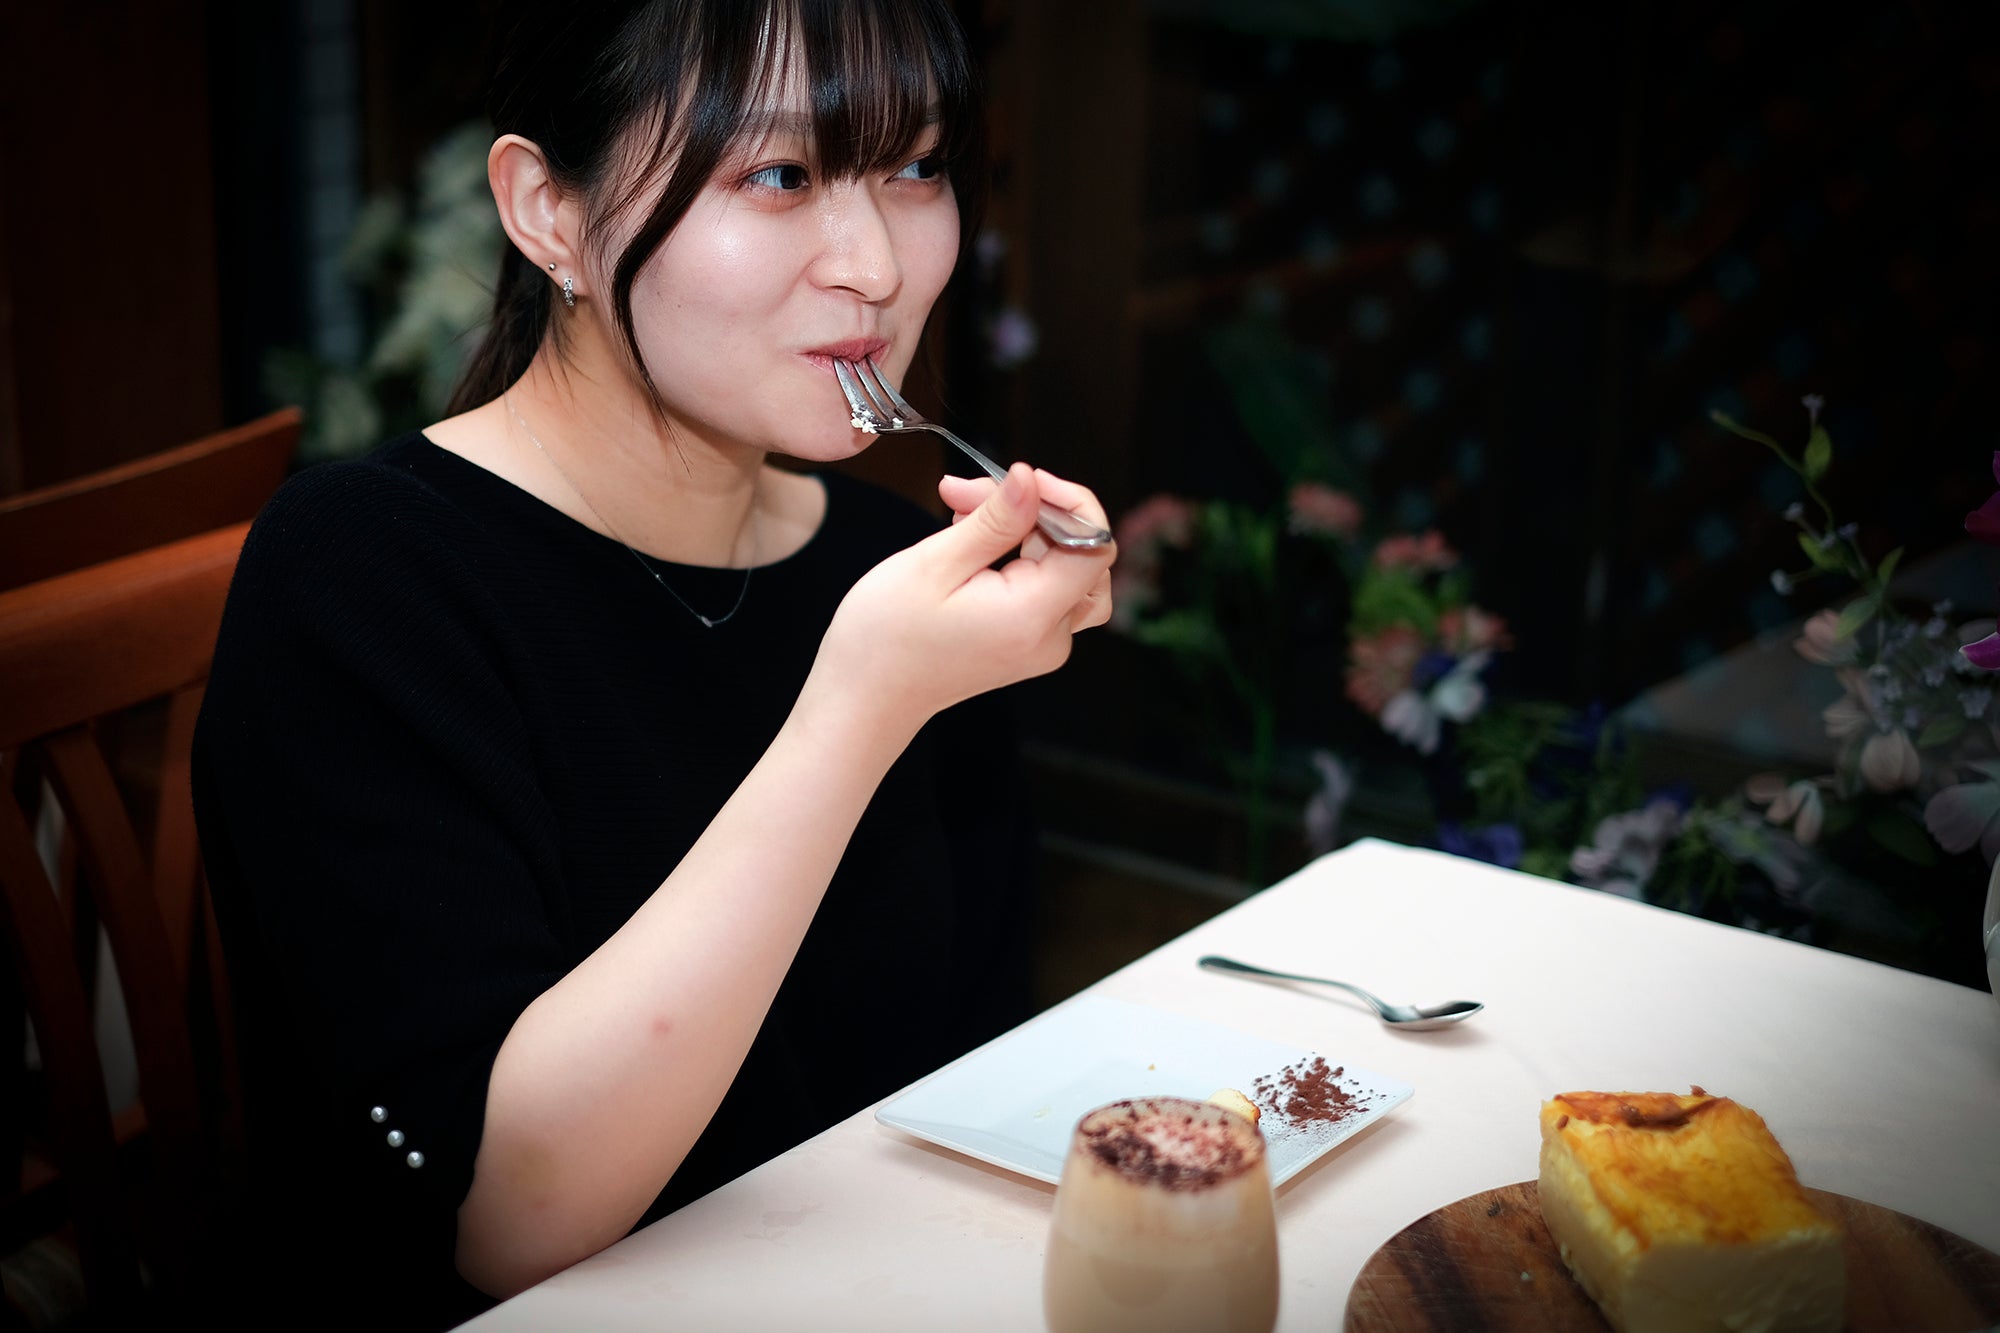 Woman eating cheesecake on restaurant table